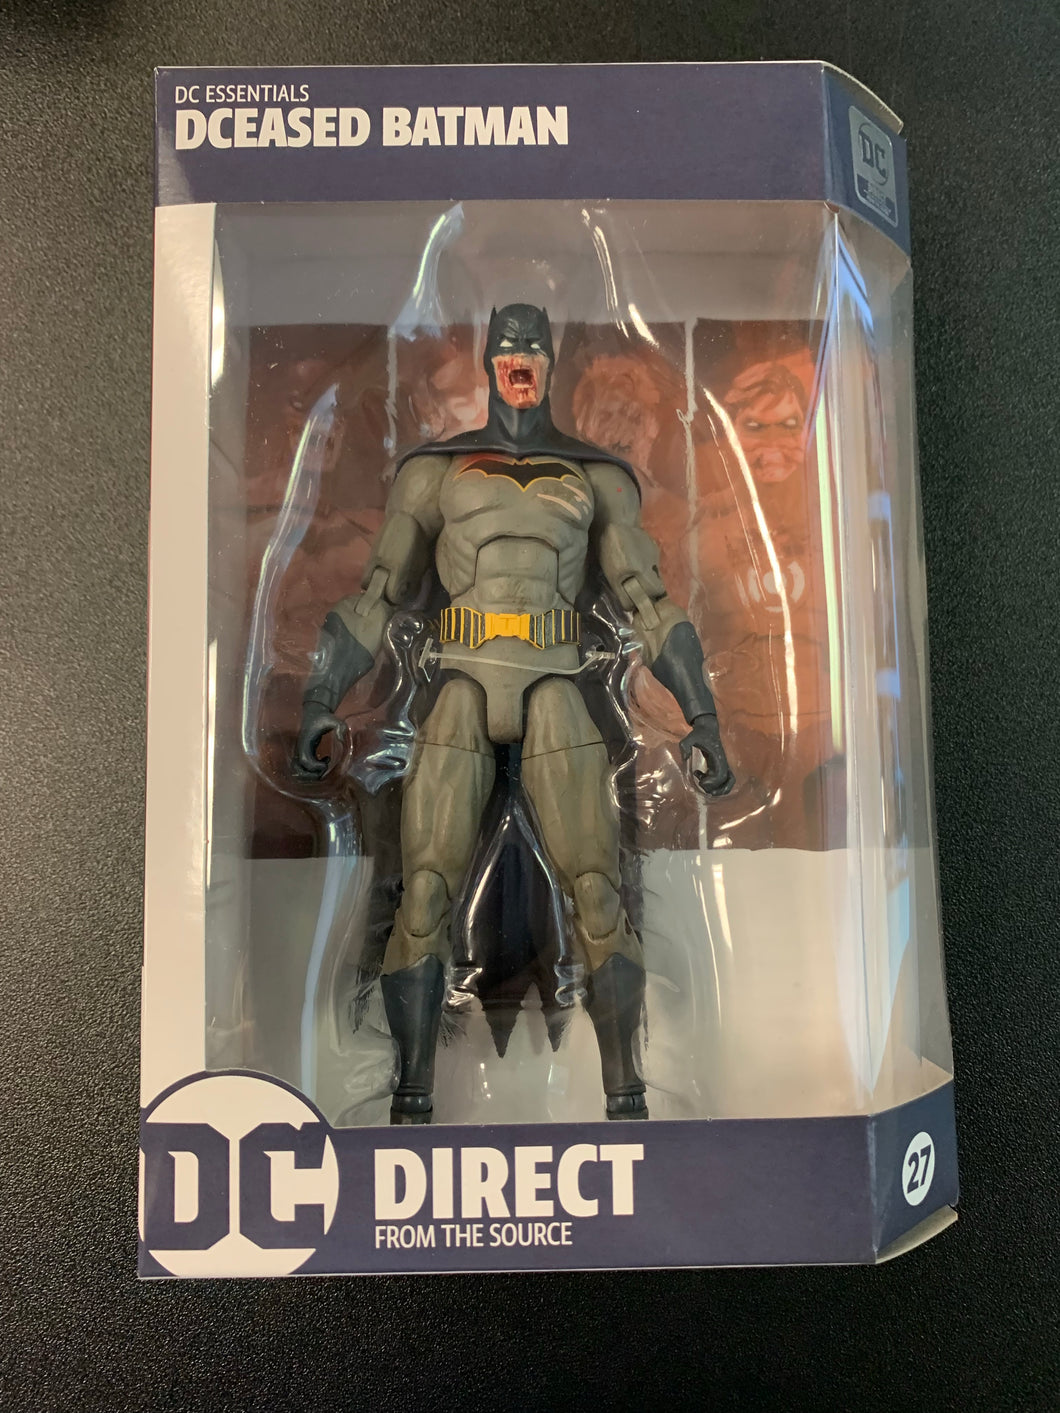 DC DIRECT FROM THE SOURCE DC ESSENTIALS DCEASED BATMAN